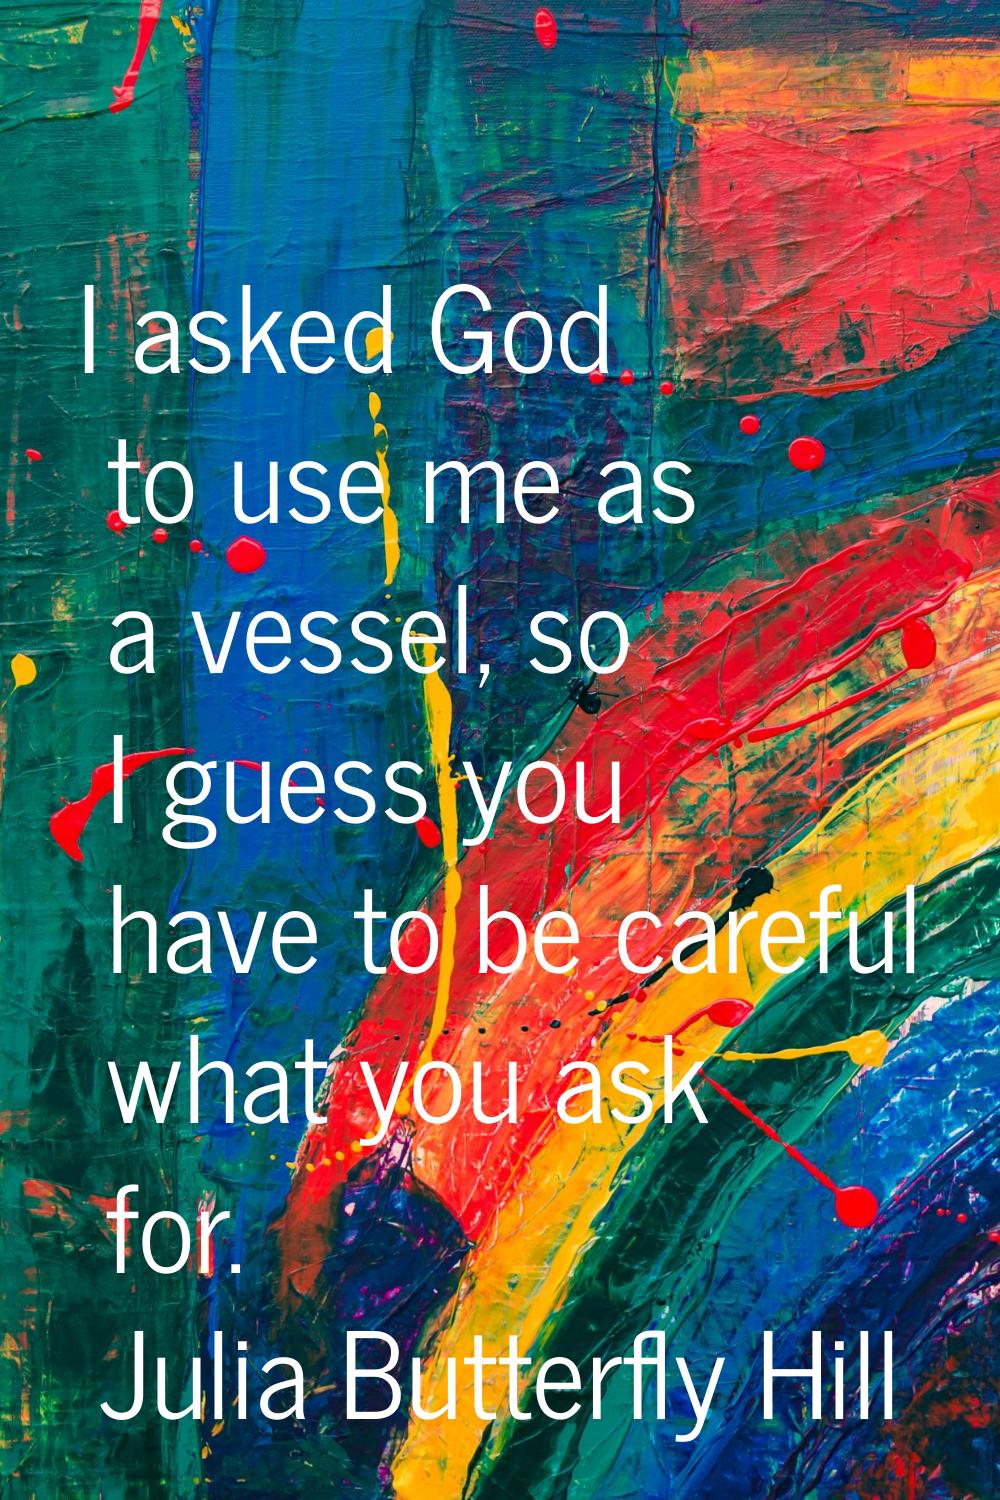 I asked God to use me as a vessel, so I guess you have to be careful what you ask for.